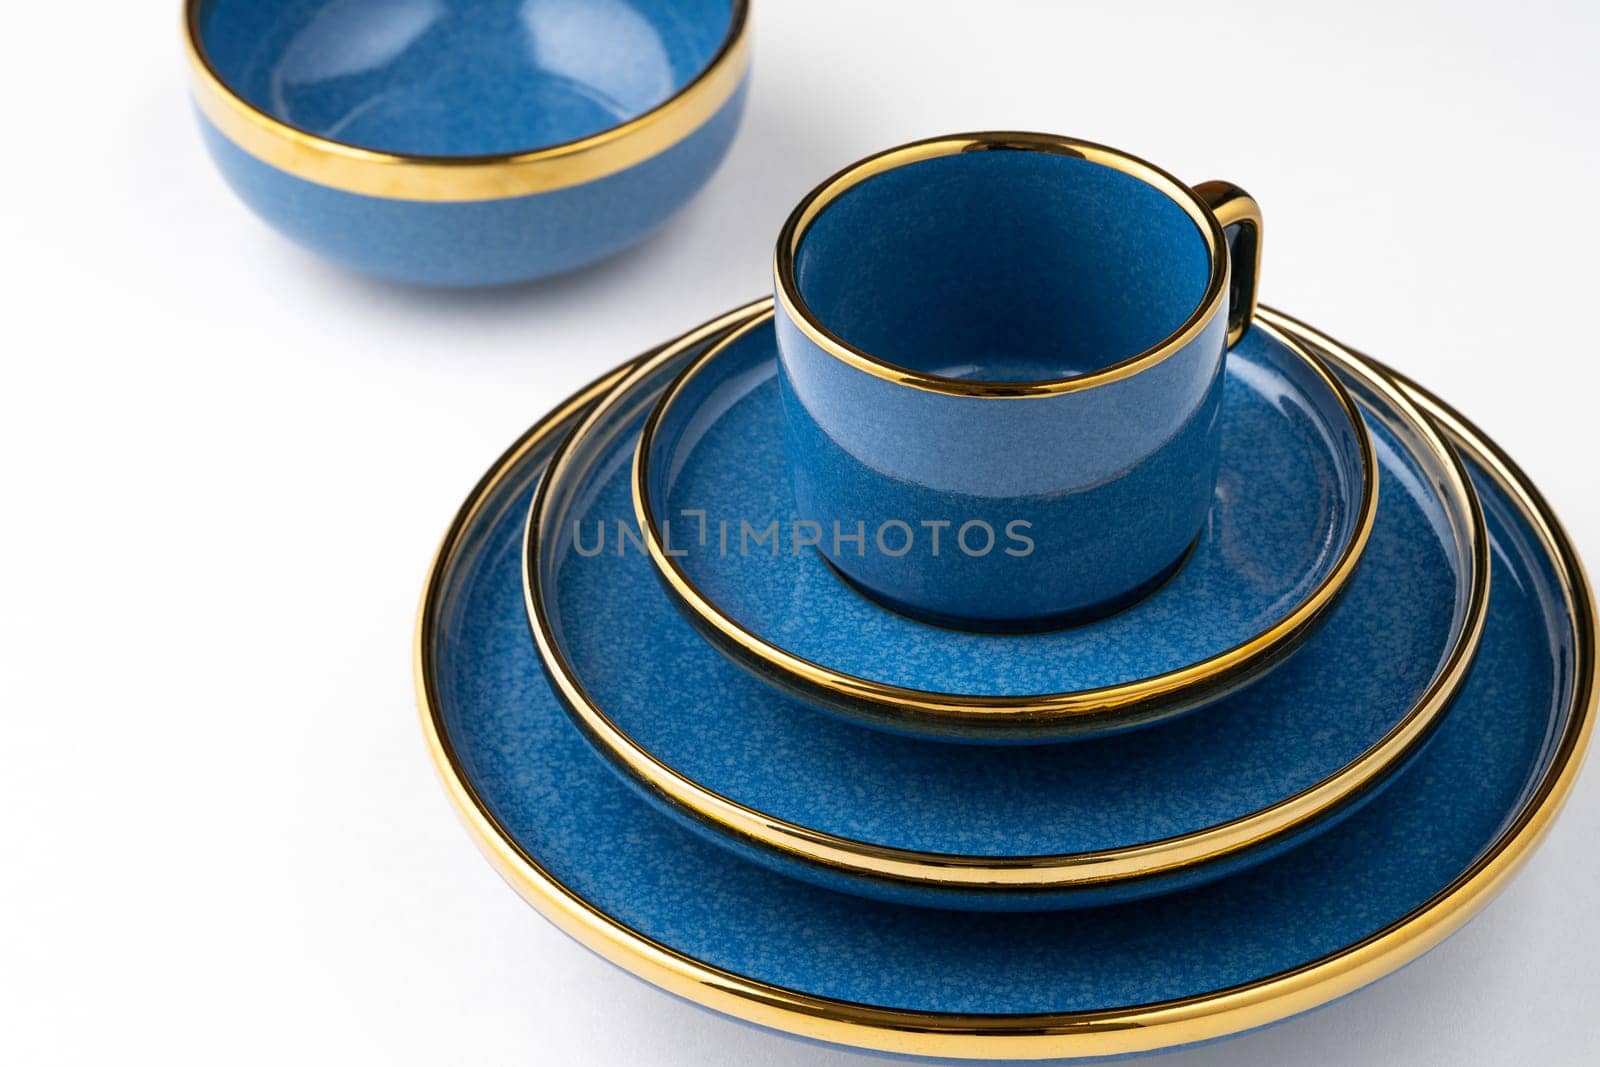 A set of blue ceramic plates and cup on a white background by A_Karim